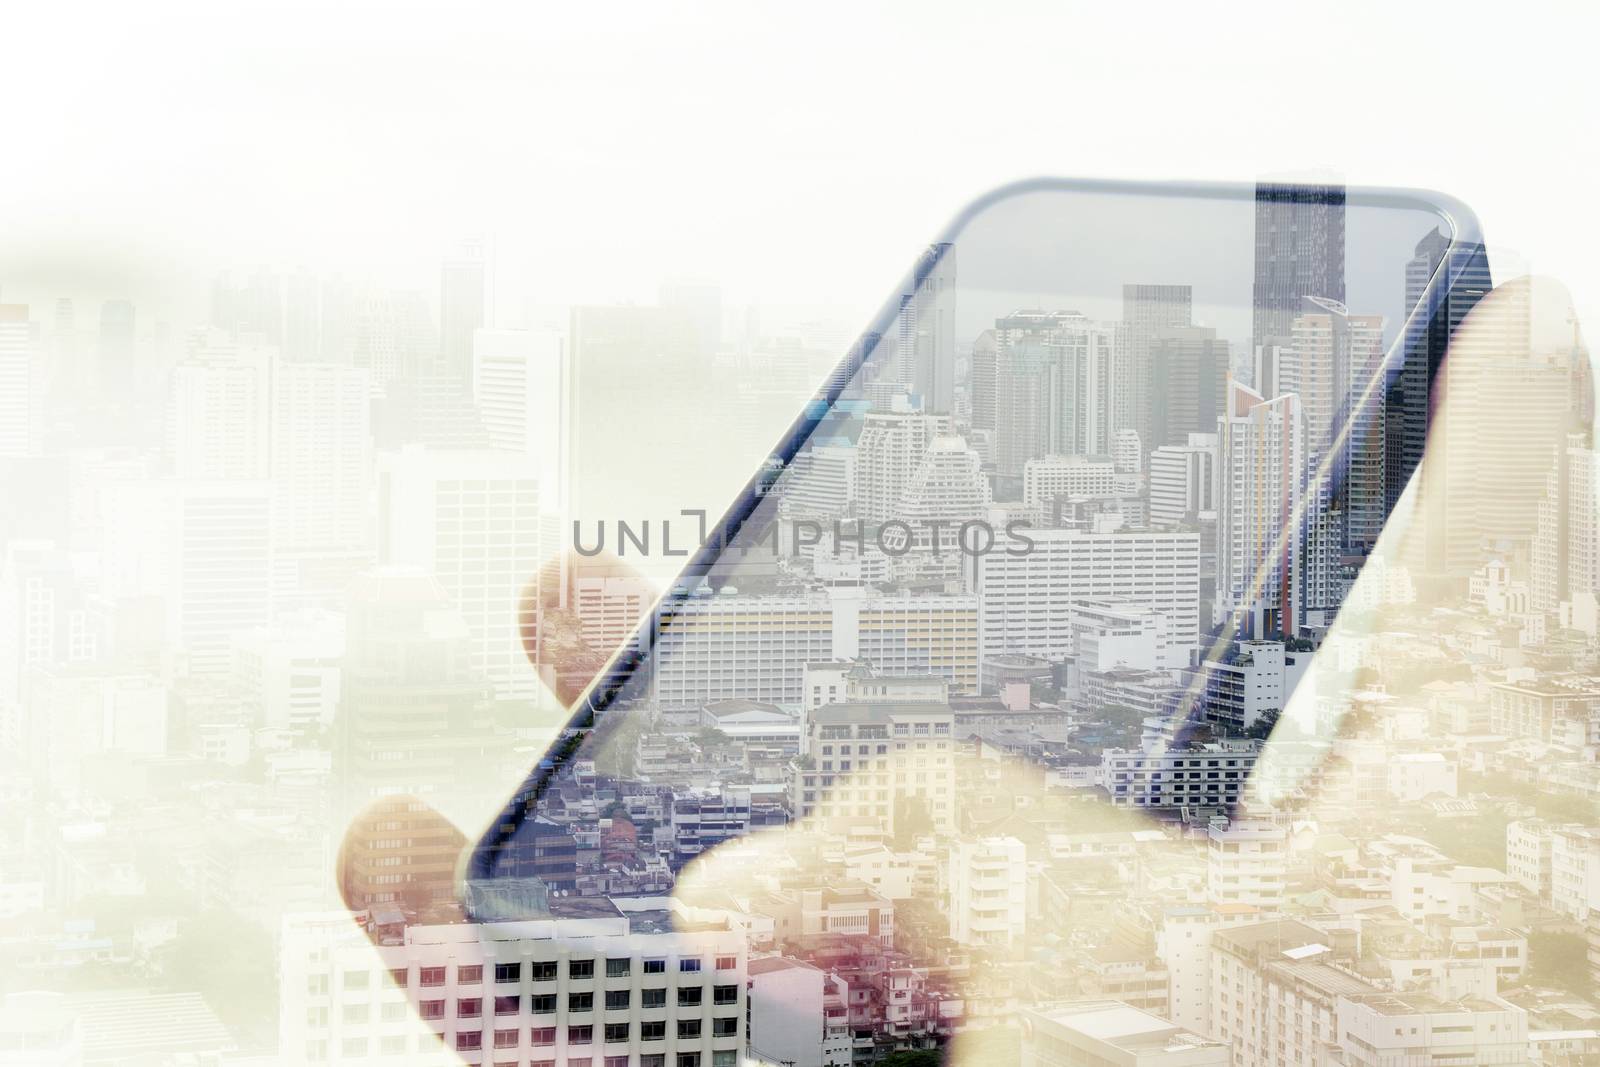 Double exposure image of using smart phone with cityscape background,Communication technology concept